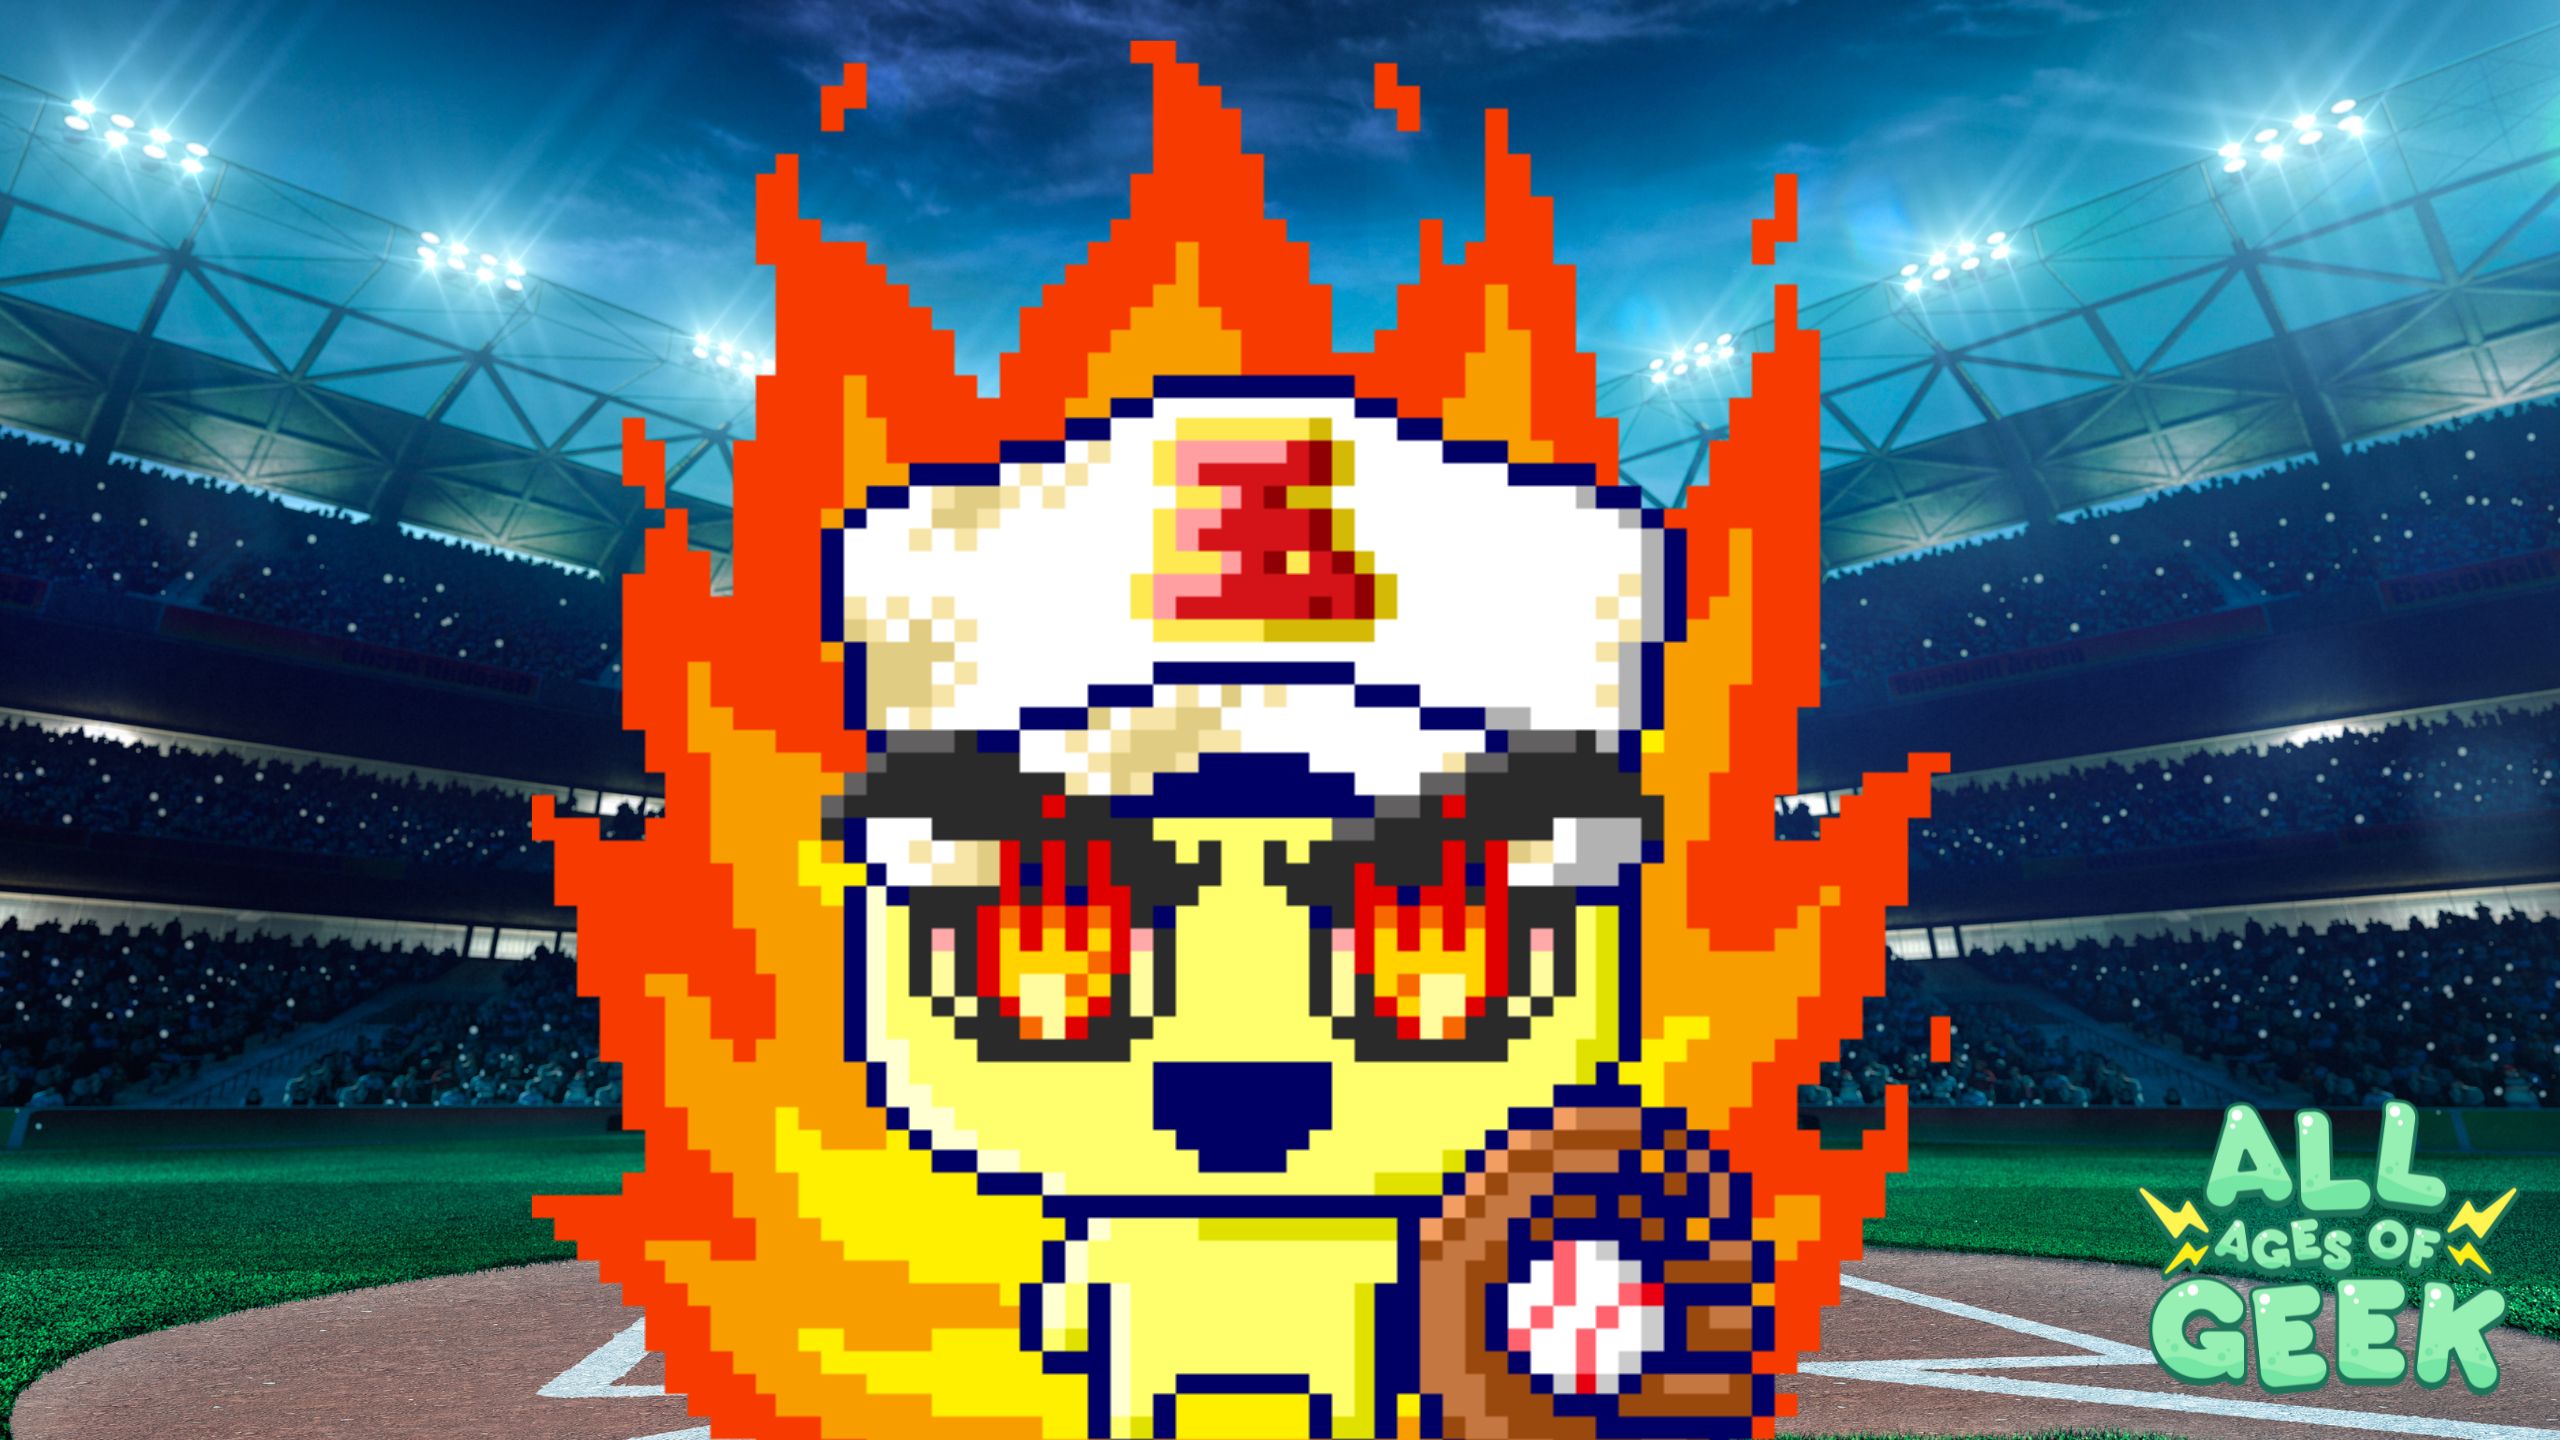 Pixelated Tamagotchi character dressed in baseball gear stands in front of a brightly lit stadium. The character is wearing a baseball hat and fiery eyewear, holding a glove and ball, with a blazing background symbolizing passion and energy. The All Ages of Geek logo is in the bottom right corner.